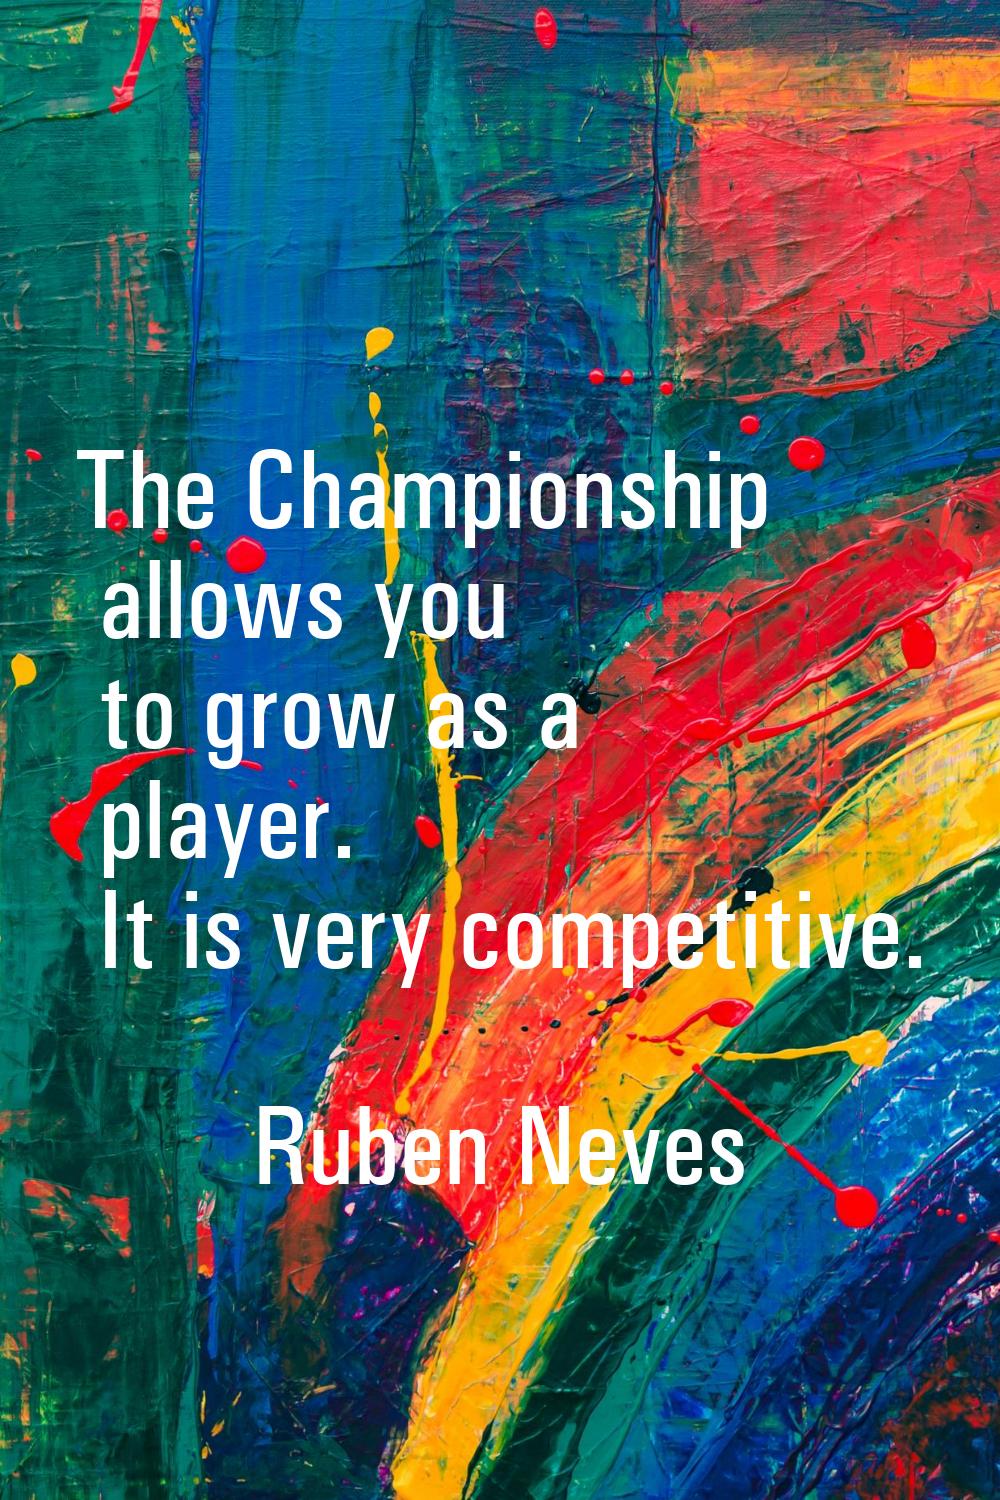 The Championship allows you to grow as a player. It is very competitive.